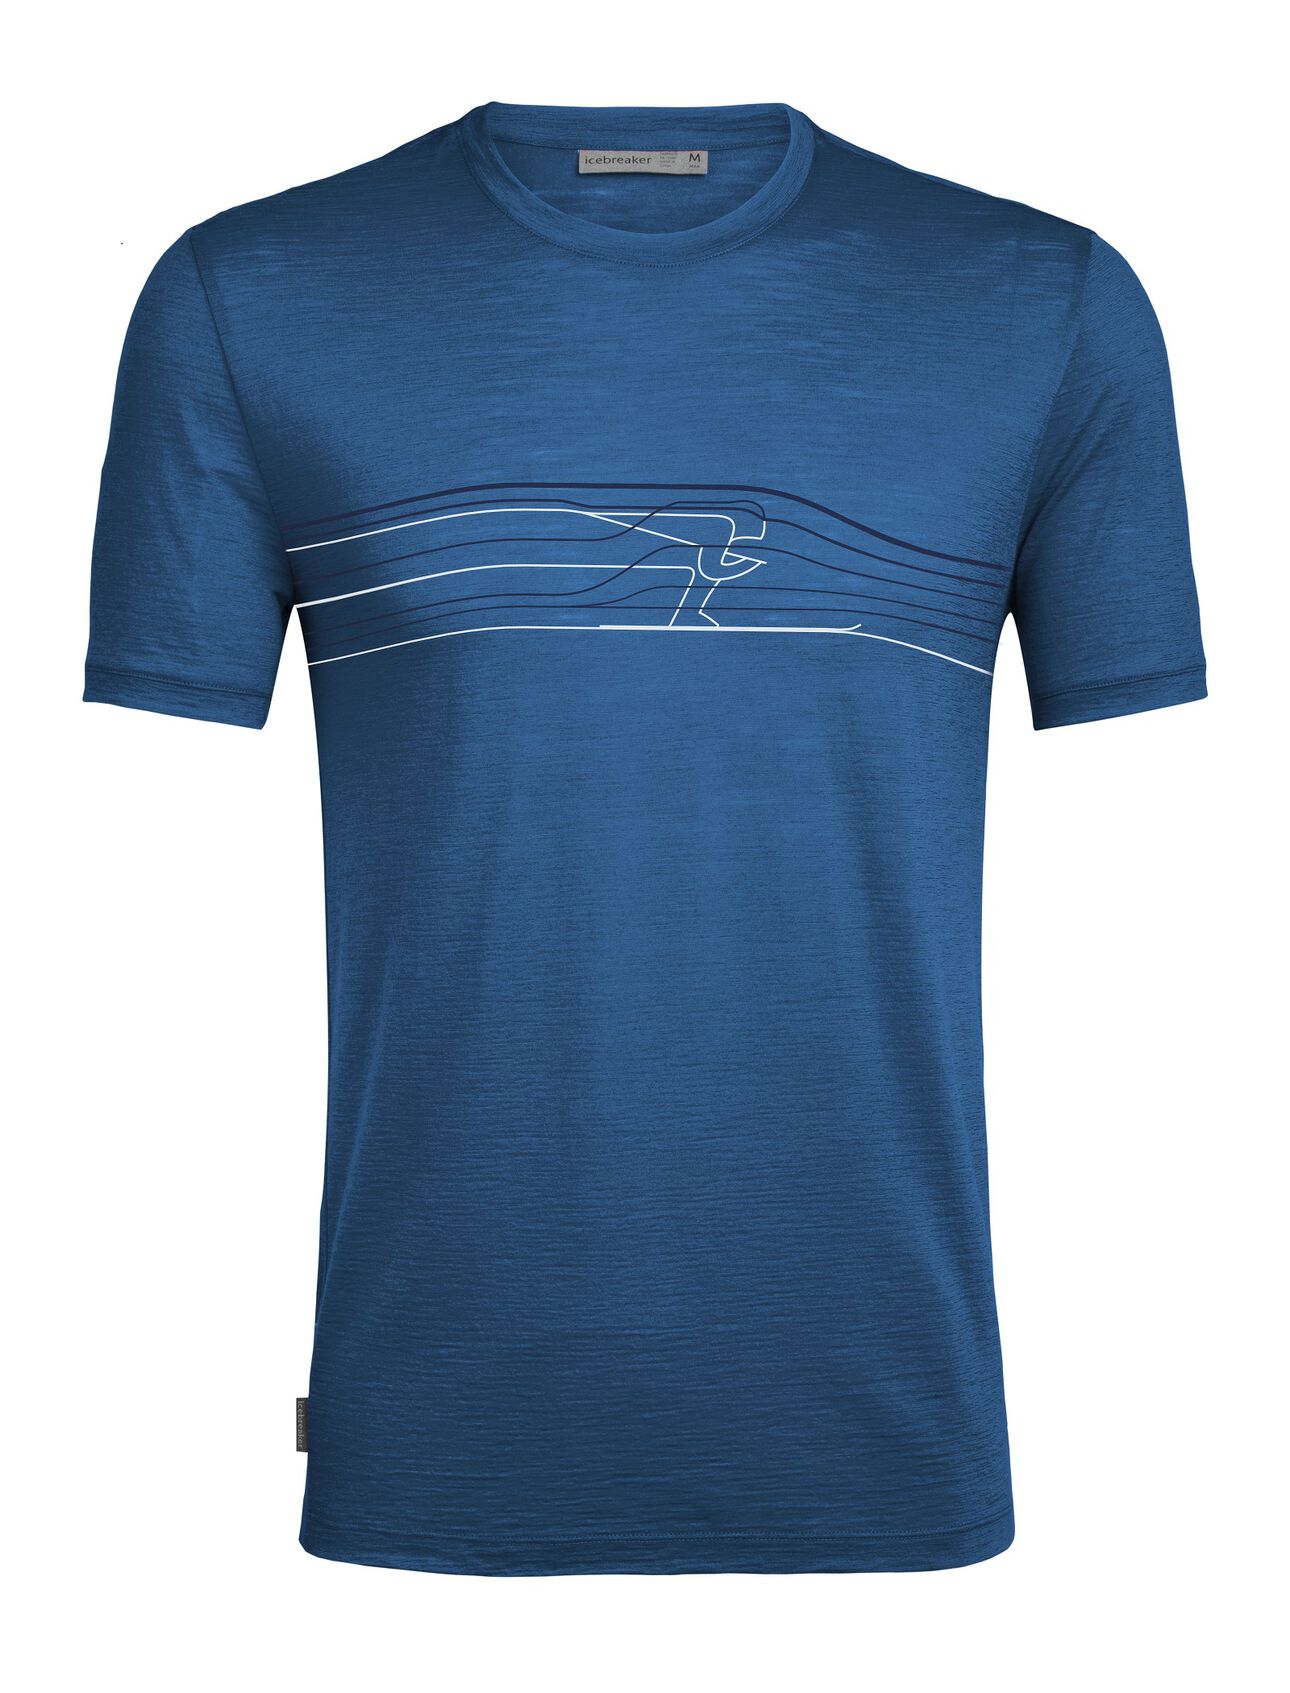 Mens Merino Spector Short Sleeve Crewe T-Shirt Ski Racer A lightweight, breathable, and versatile merino wool T-shirt ideal for everything from hiking to travel, our Spector Short Sleeve Crewe Ski Racer is a go-to for any and every day.